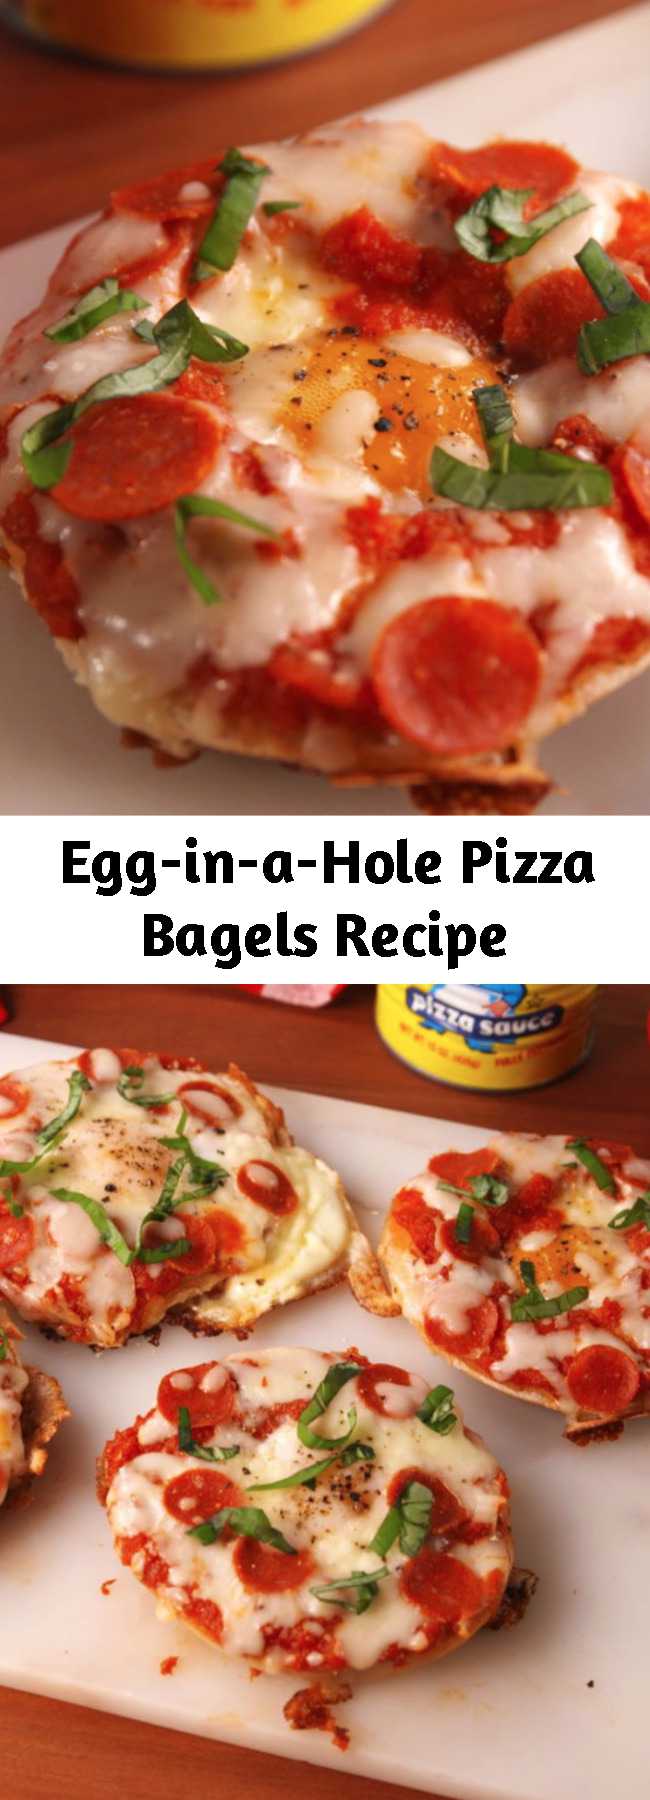 Egg-in-a-Hole Pizza Bagels Recipe - We didn't think it was possible, but pizza bagels actually just got better.